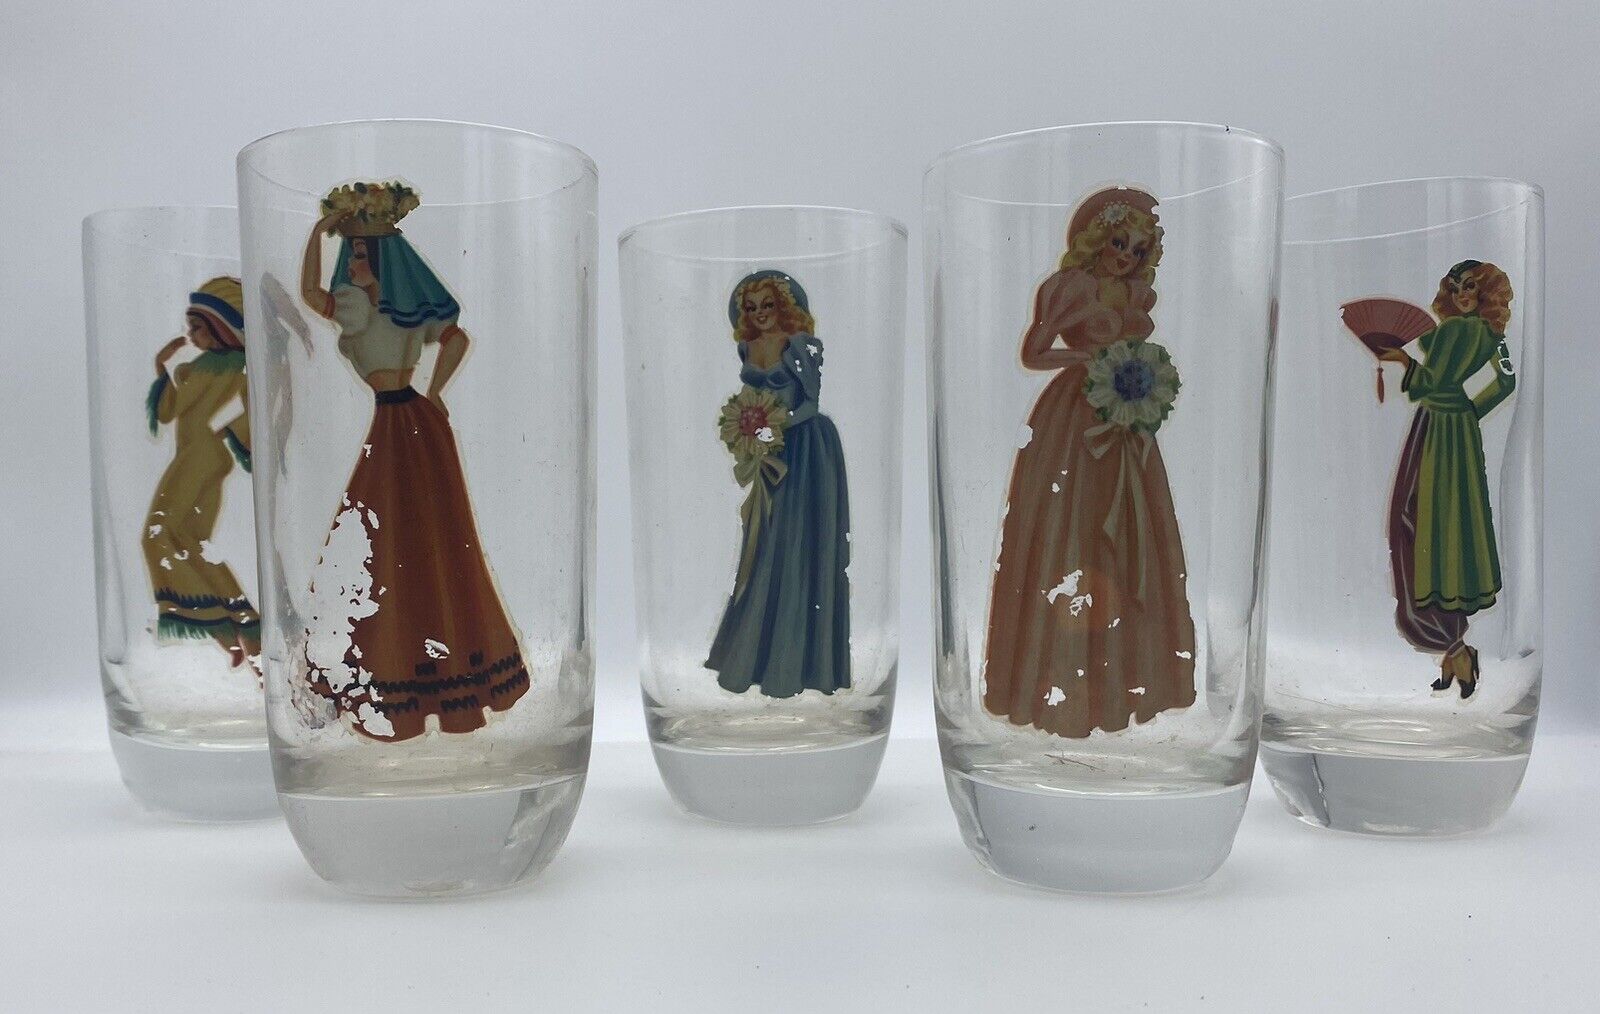 1940's/50's Pinup Girl/Peek-A-Boo Drinking Glasses - Set of 5